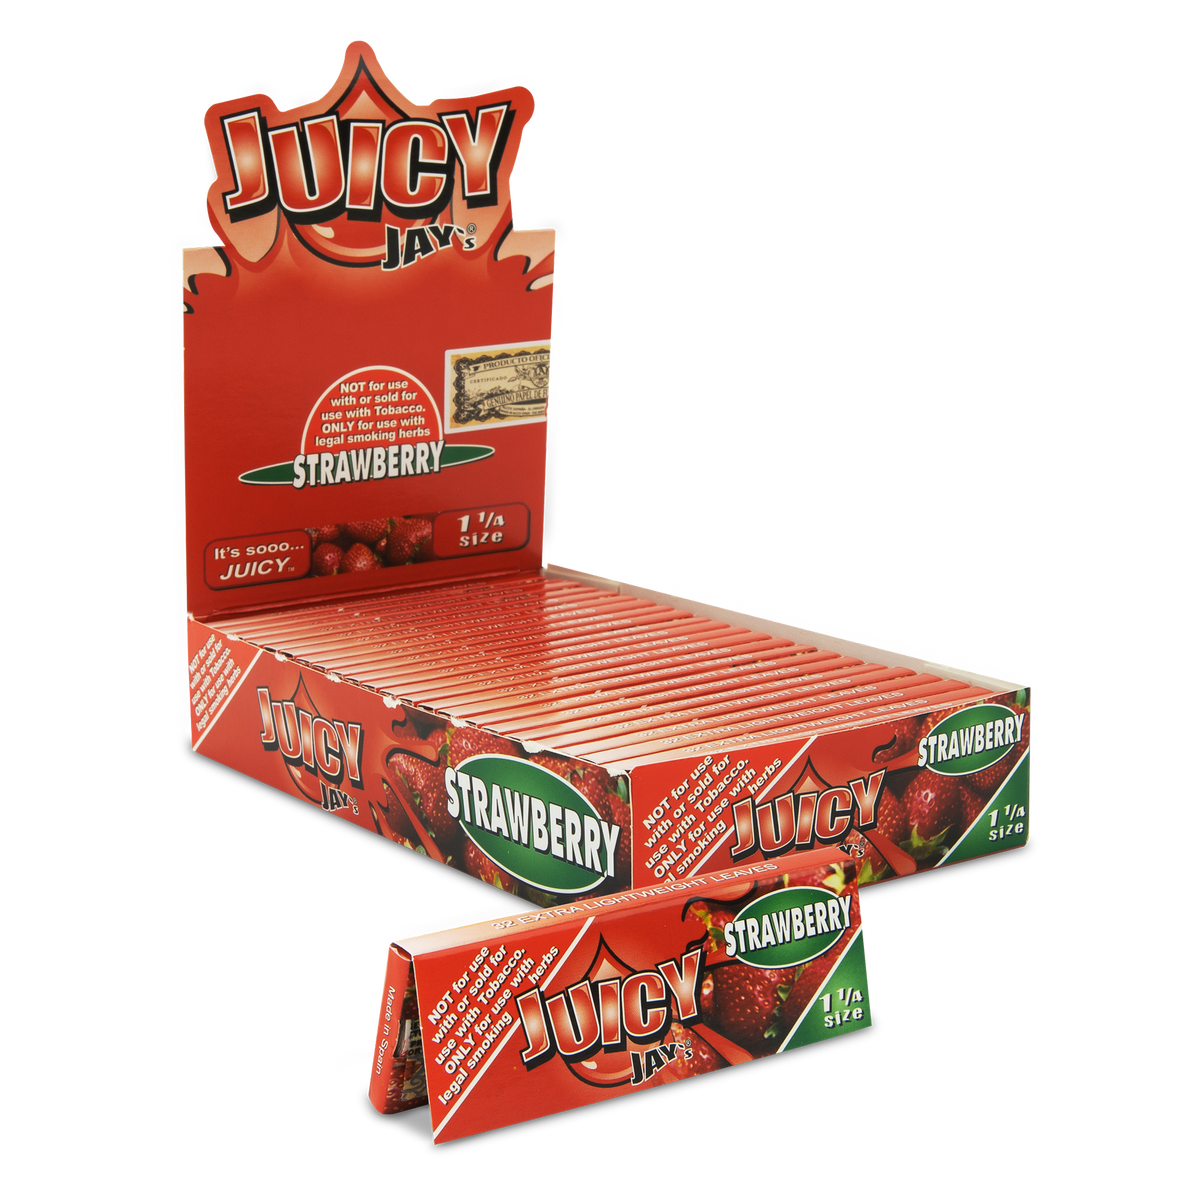 Juicy Jays 1 1/4 Strawberry Flavored Hemp Rolling Papers Rolling Papers JAY10020 esd-official